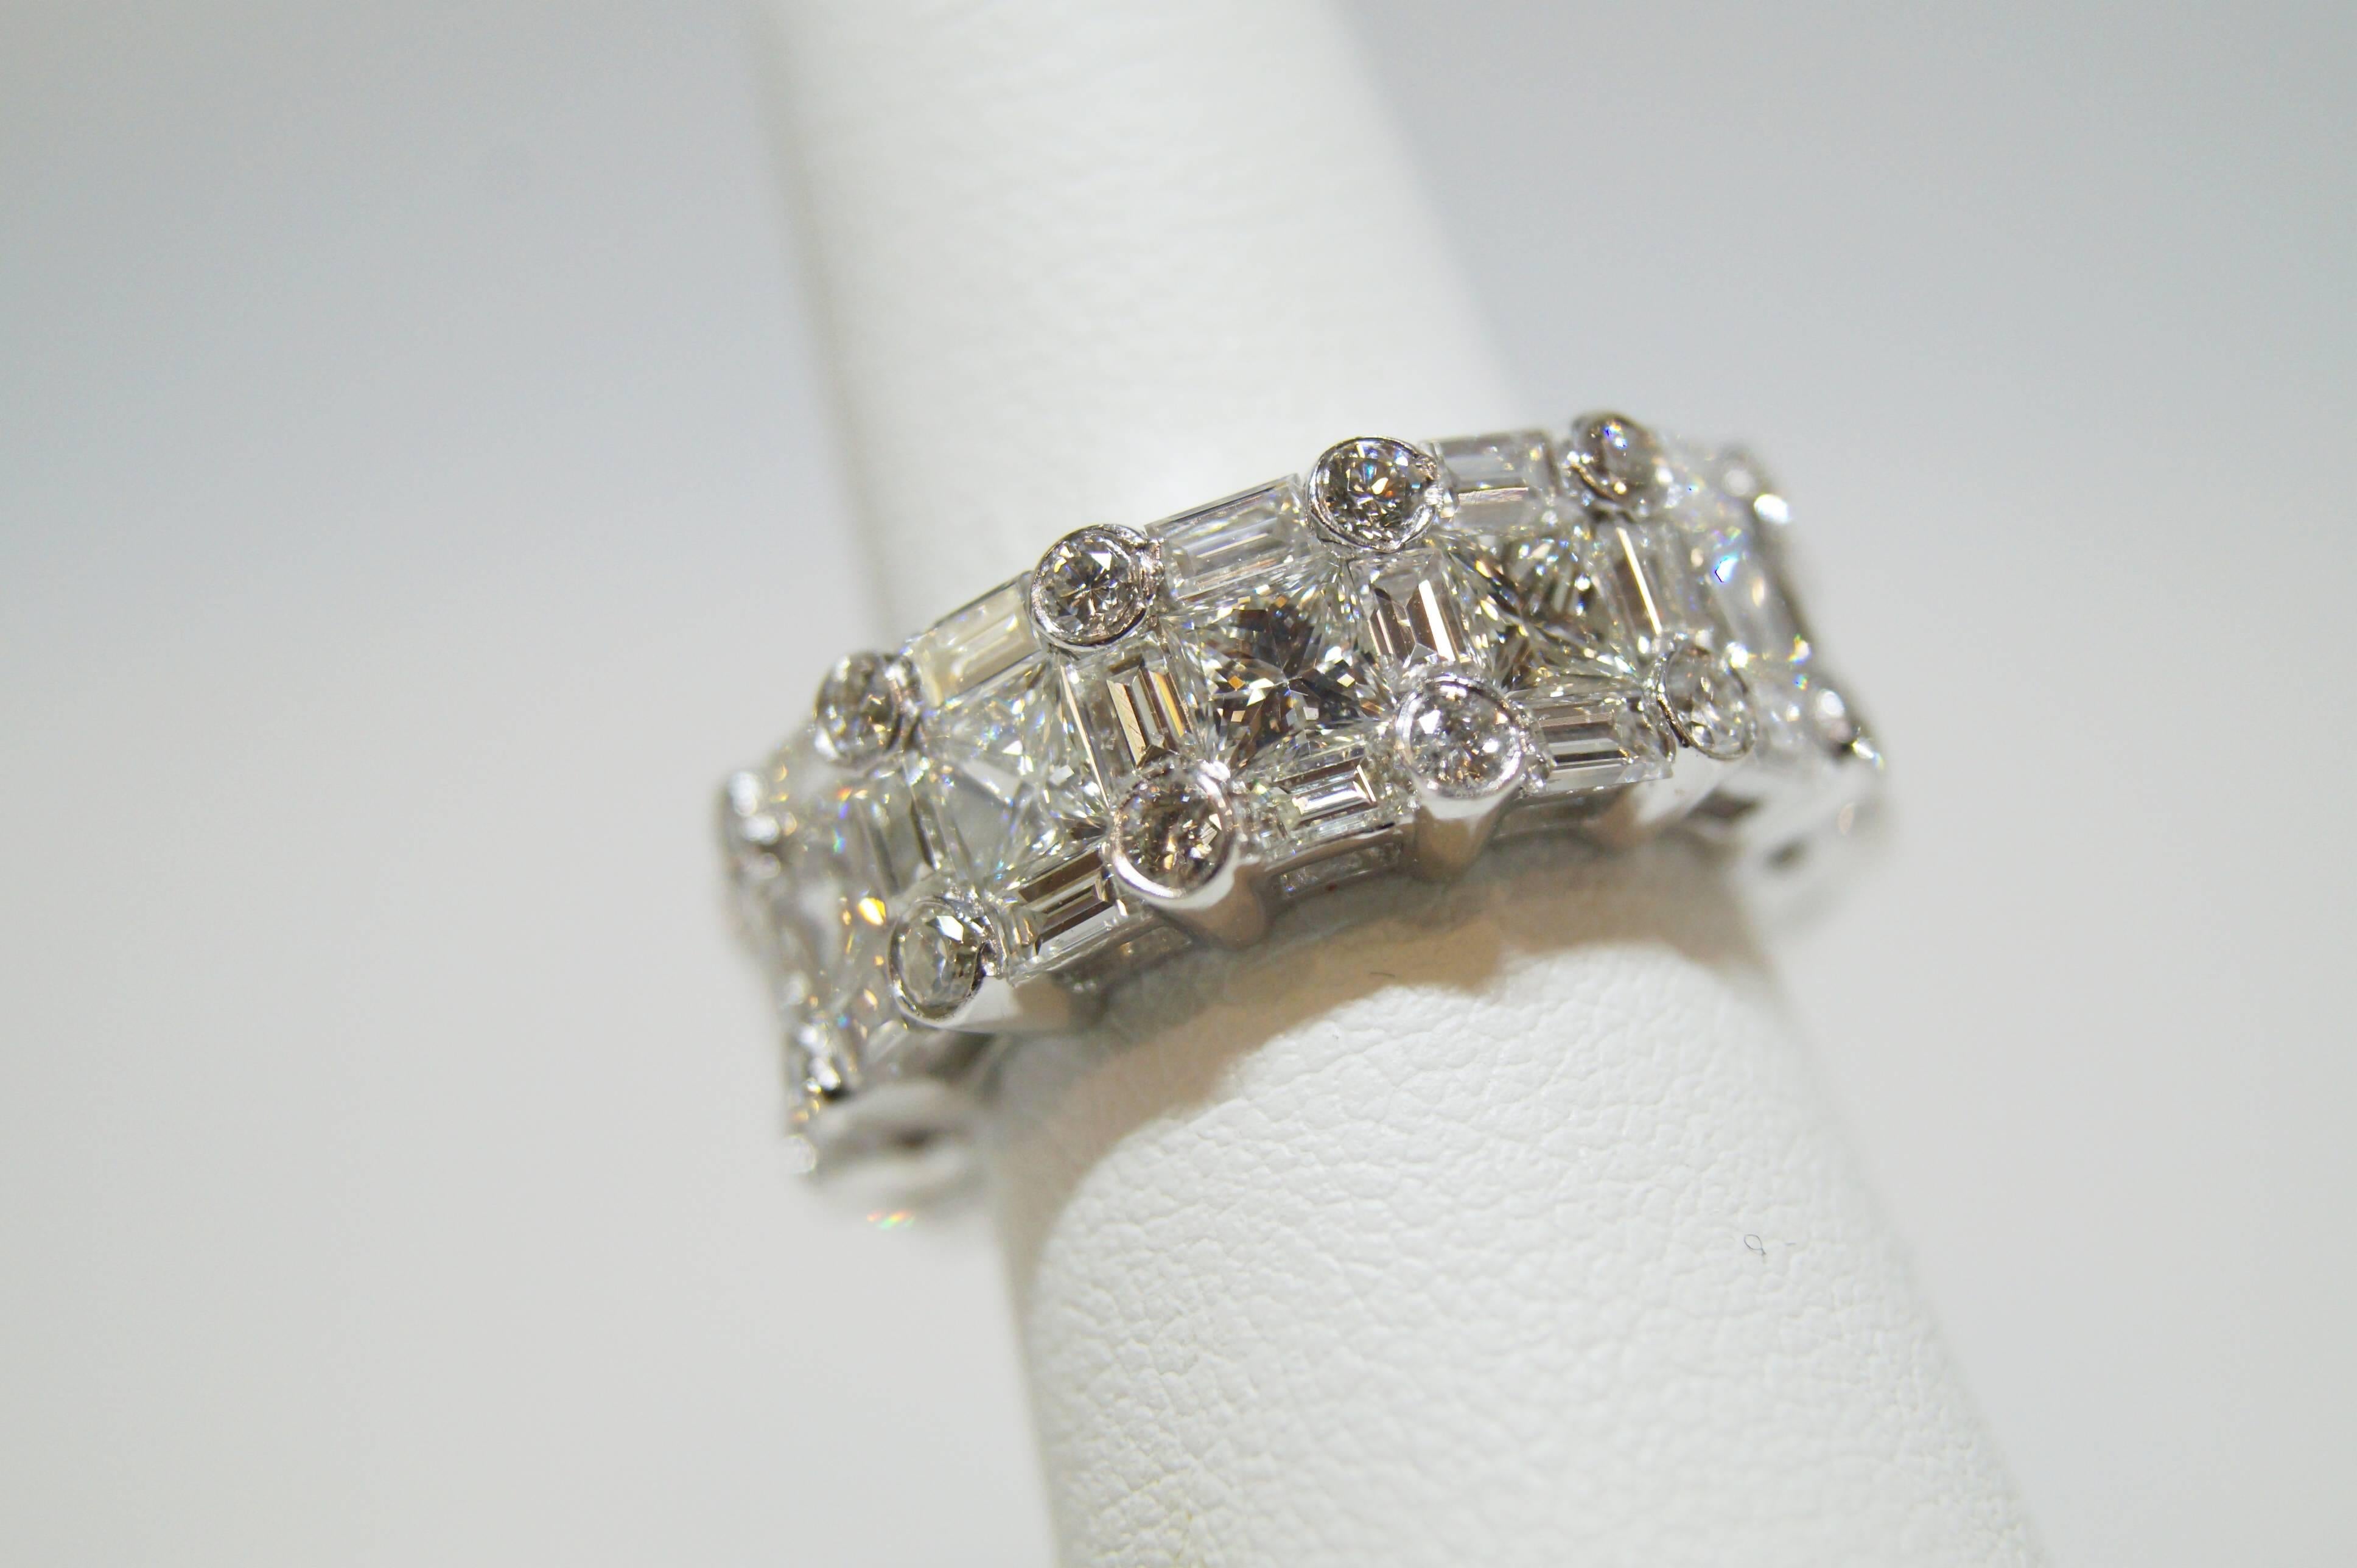 This unique eternity wedding band features 13 Princess cut diamonds 3.67 cts, 40 Baguette diamonds 3.02 cts and 26 full cut round diamonds weighing 0.30 cts. The diamonds are G in color, and VS in clarity